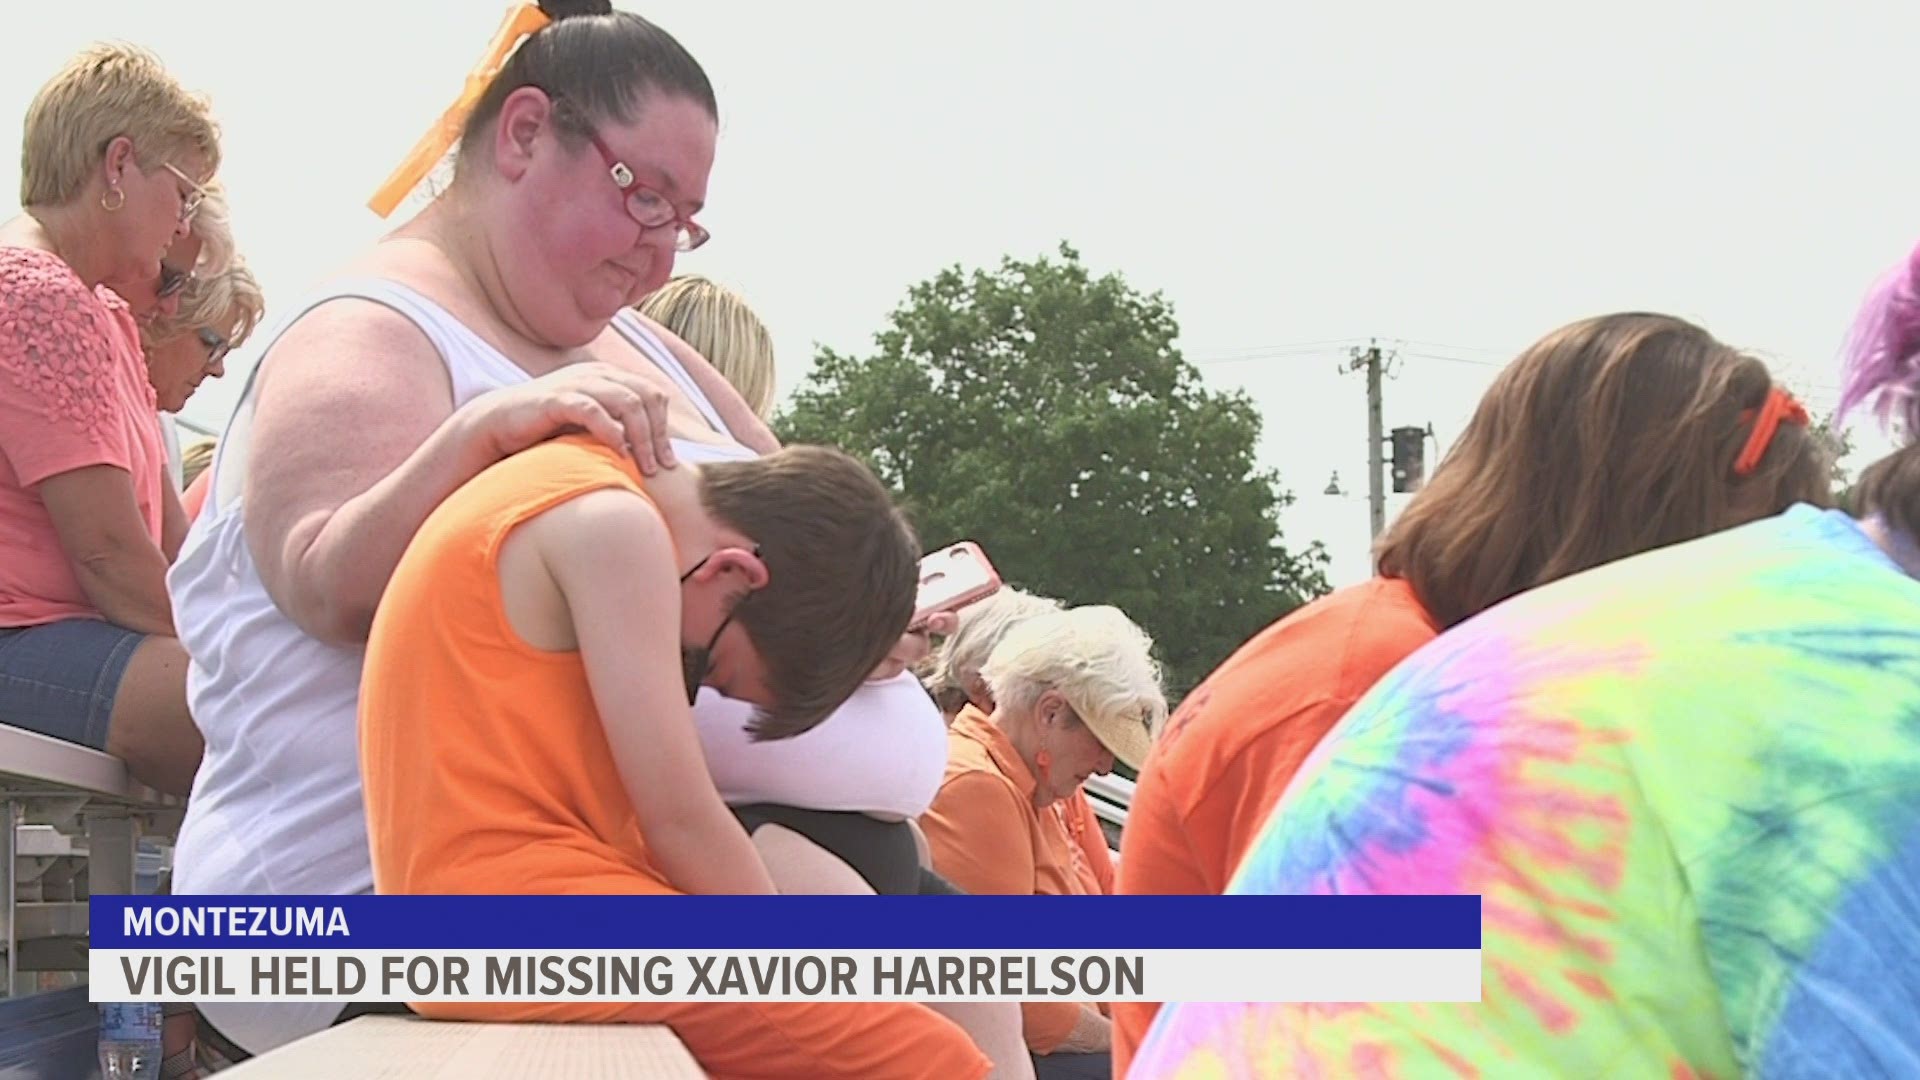 More than 75 community members came to support Xavior's family and the Montezuma community Sunday.